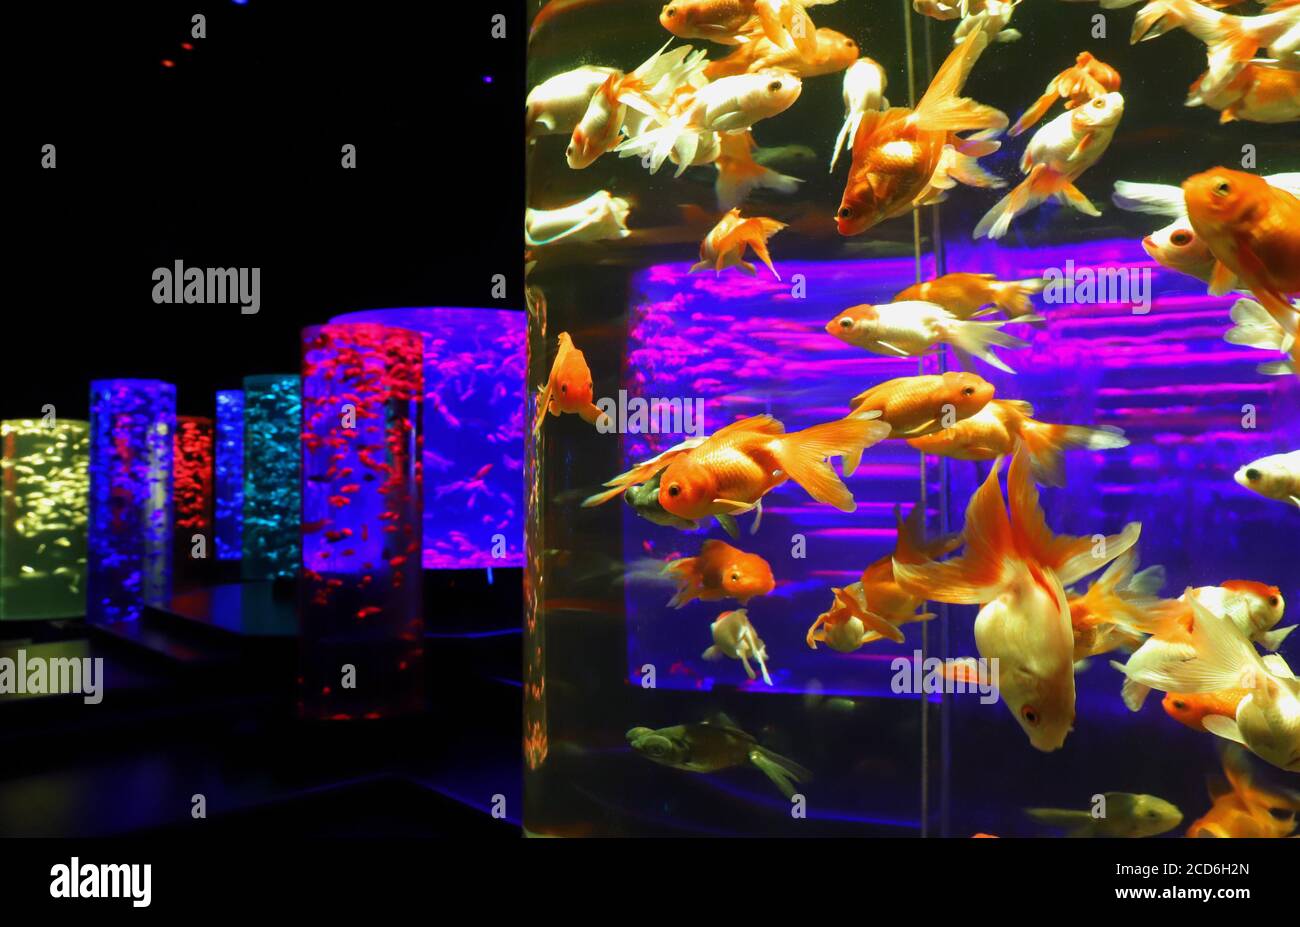 Tokyo, Japan. 27th Aug, 2020. Some 30,000 various kinds of goldfish are displayed at a press preview of the Art Aquarium Museum in Tokyo on Thursday, August 27, 2020. The Art Aquarium Museum, installations with goldfish will open Tokyo's business and shopping district Nihonbashi on August 28. Credit: Yoshio Tsunoda/AFLO/Alamy Live News Stock Photo